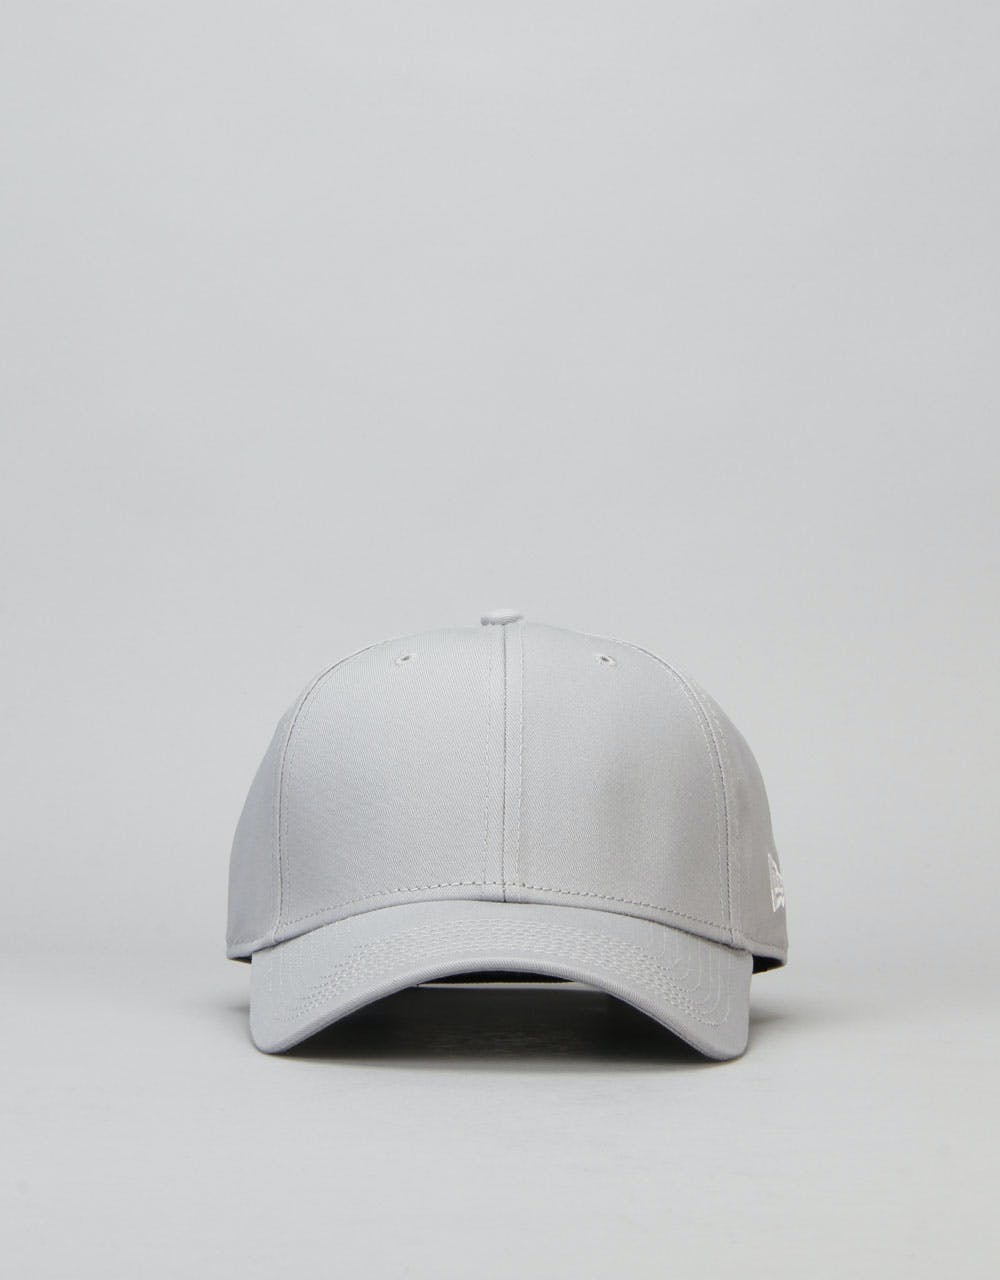 New Era 9Forty Flag Collection Cap - Grey/White